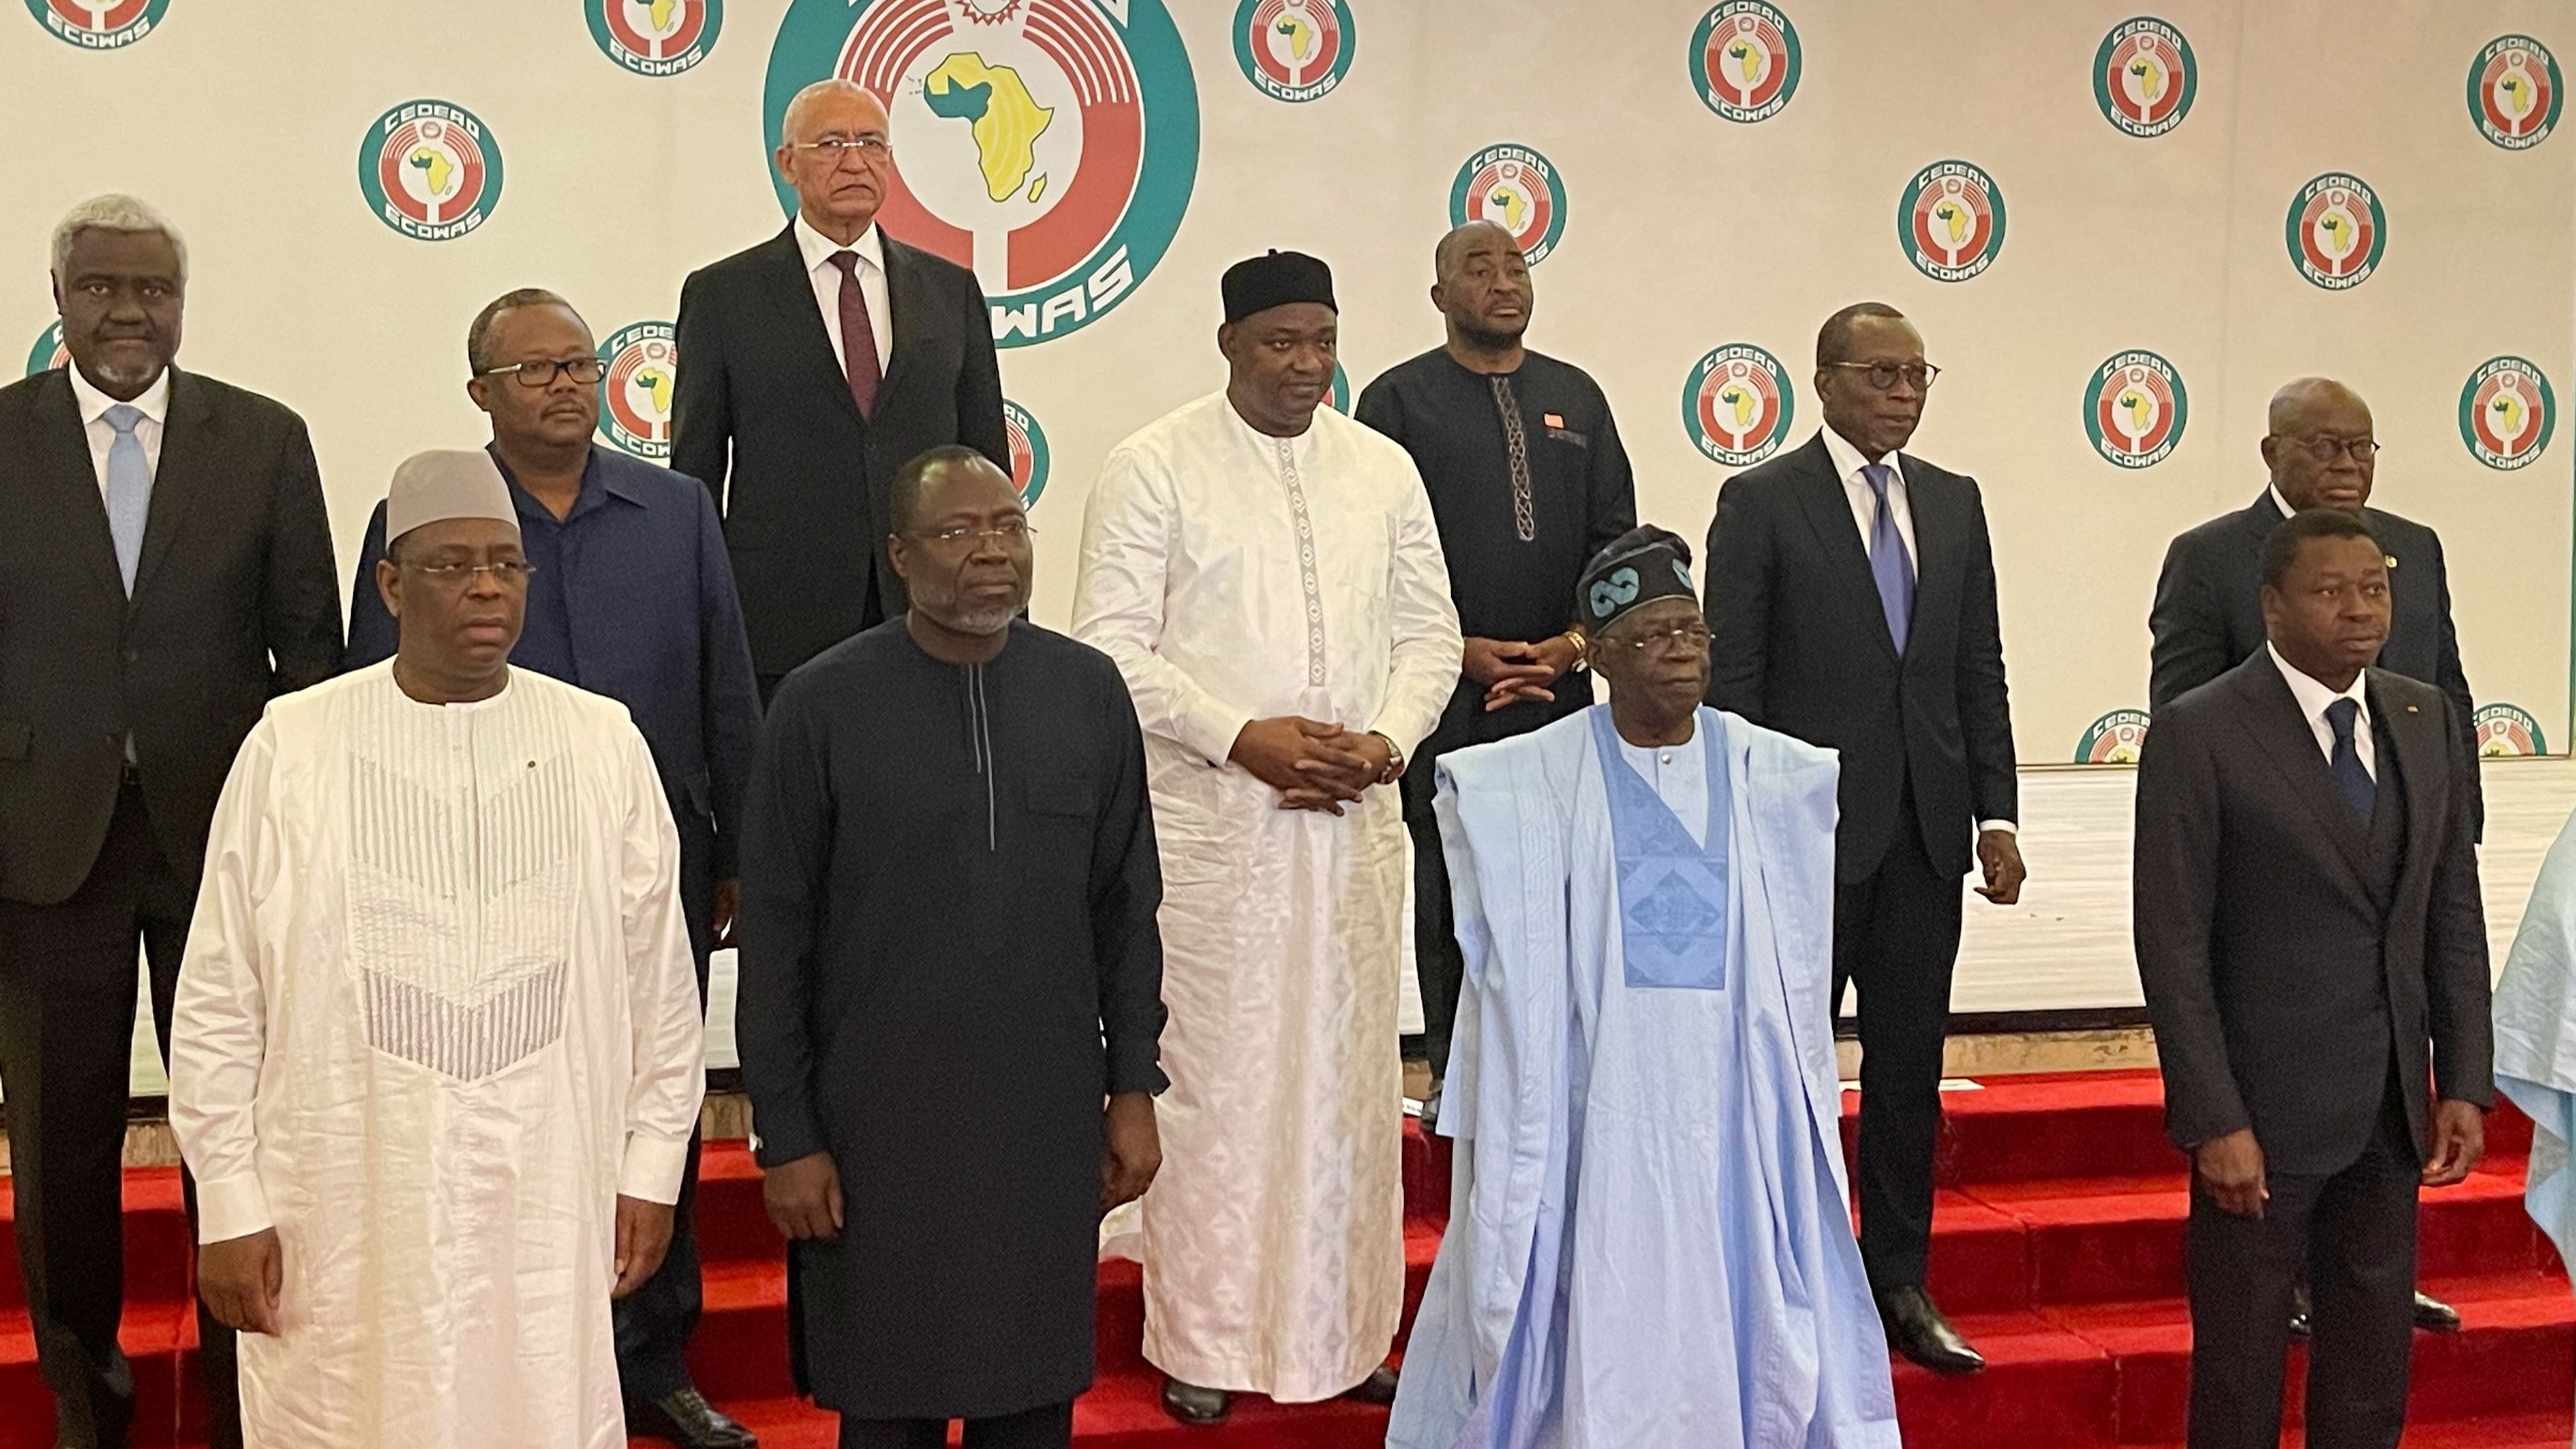 Daily Review: Is ECOWAS’ Sanctions Relief Too Little, Too Late?